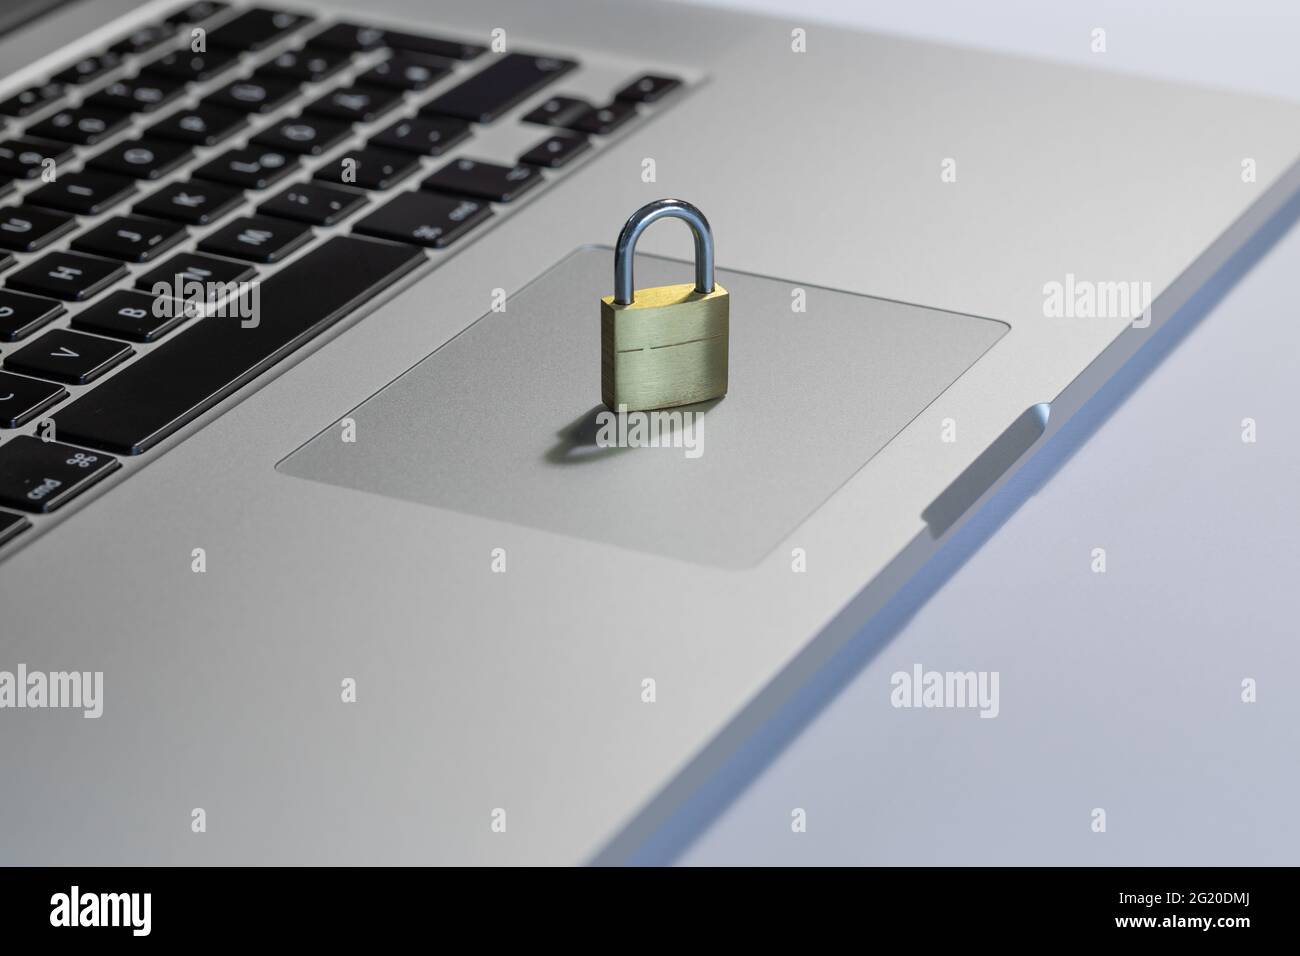 IT Business, it's about protecting data Stock Photo